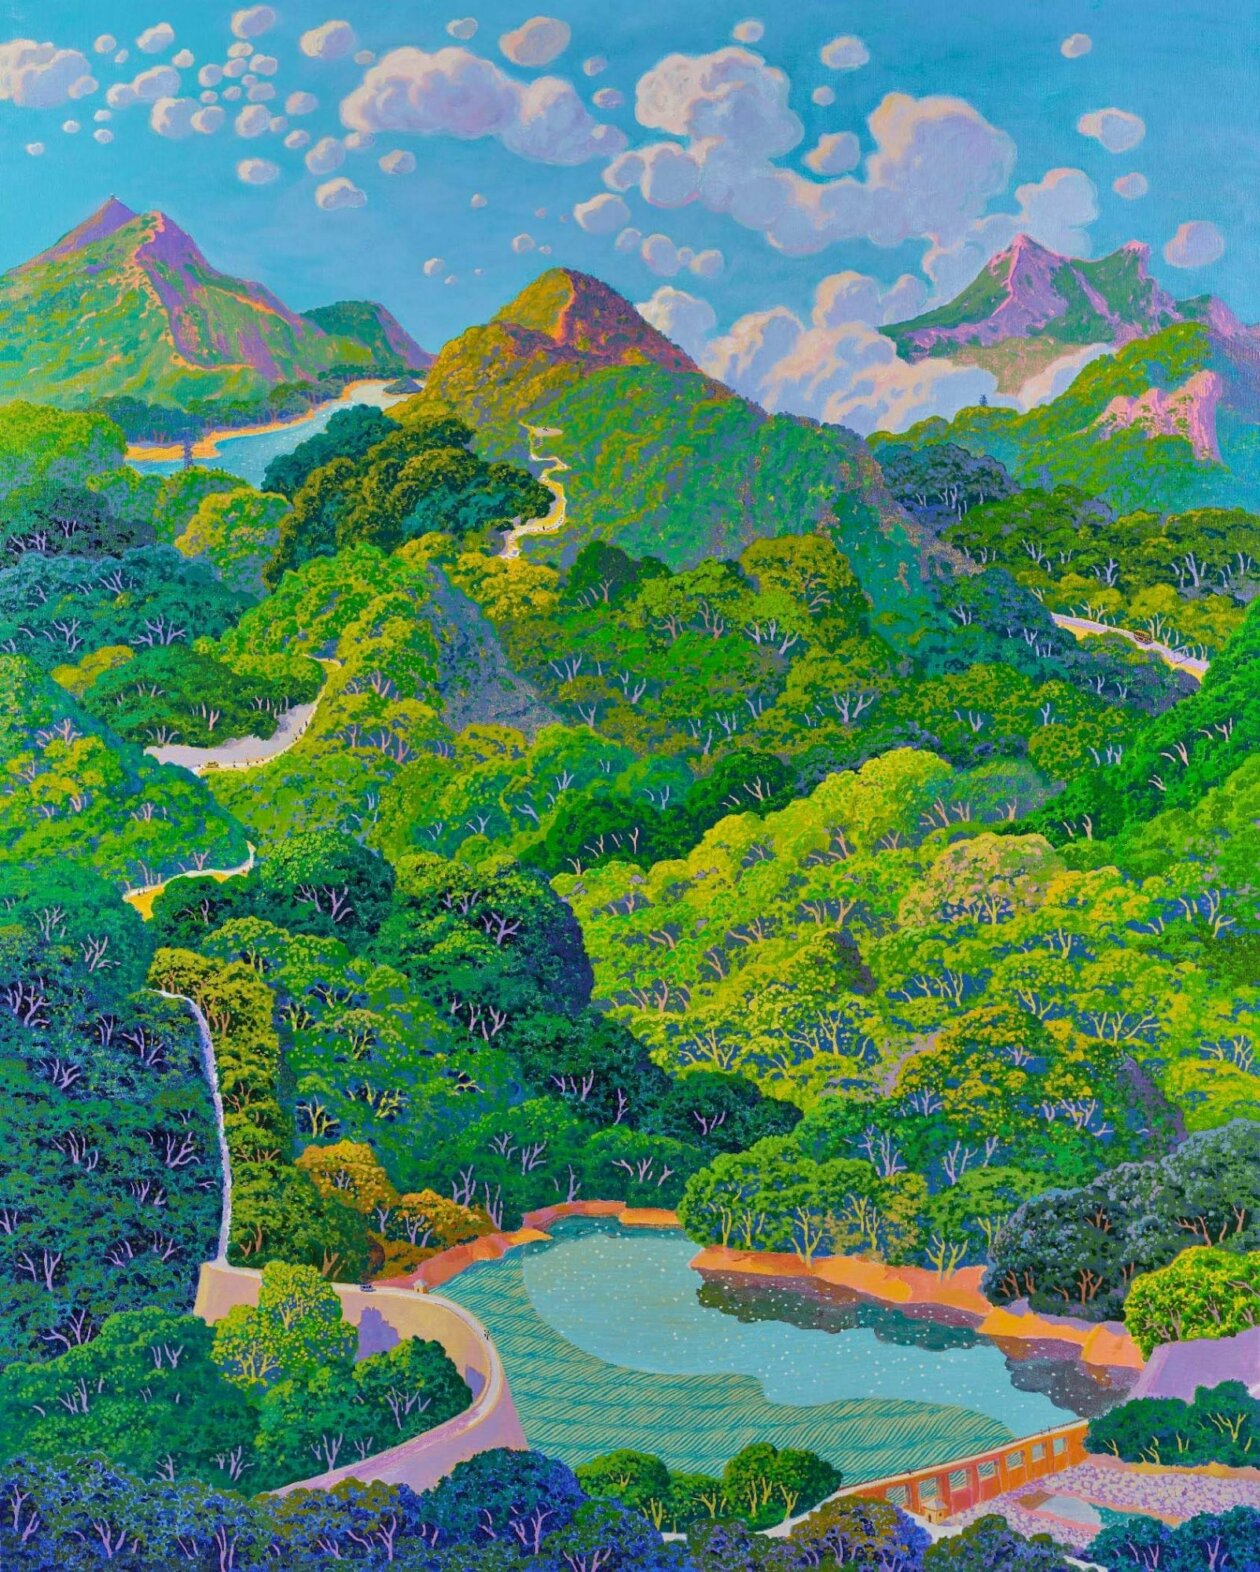 Vivid Saturated Landscape Paintings By Stephen Wong Chun Hei (5)